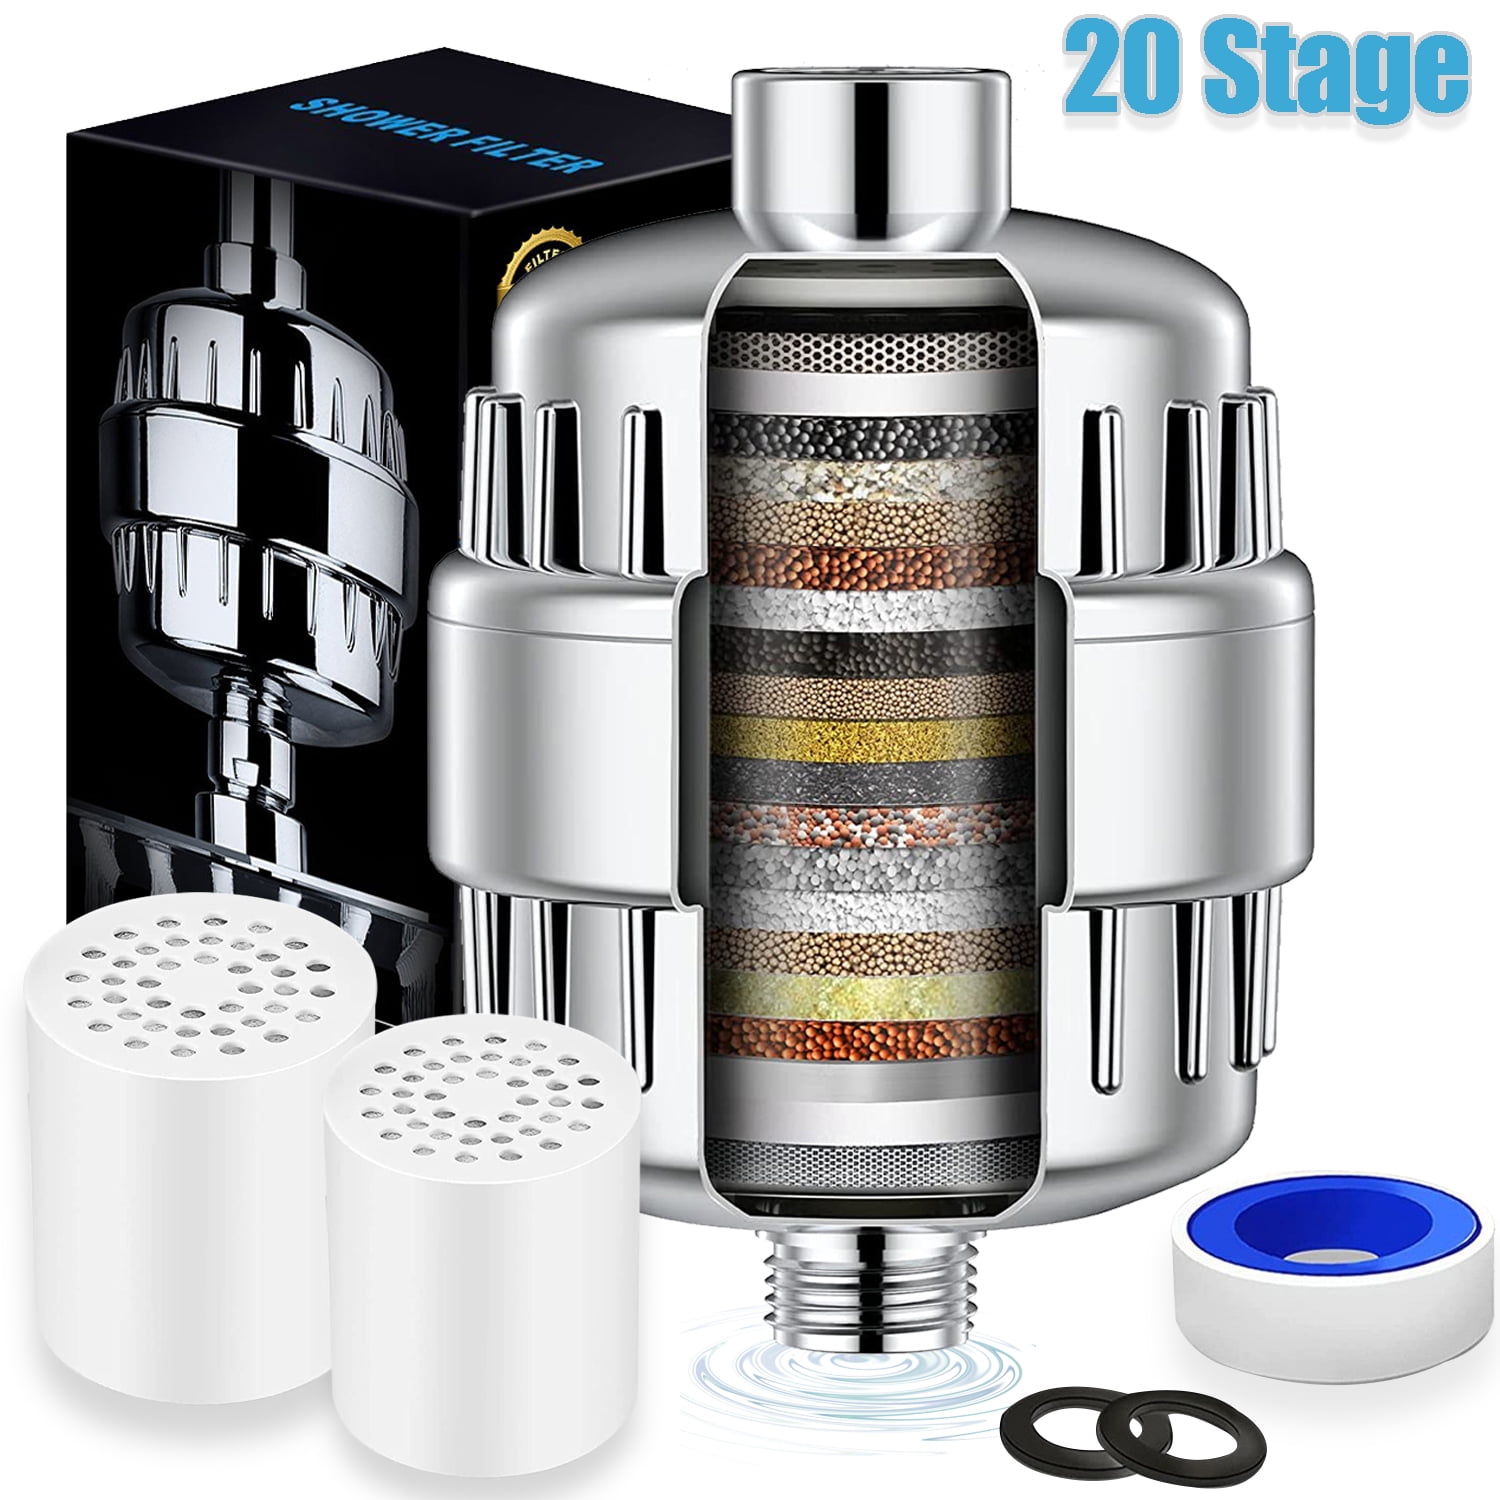 20 Stage Shower Filter For Hard Water, with 2 Replaceable